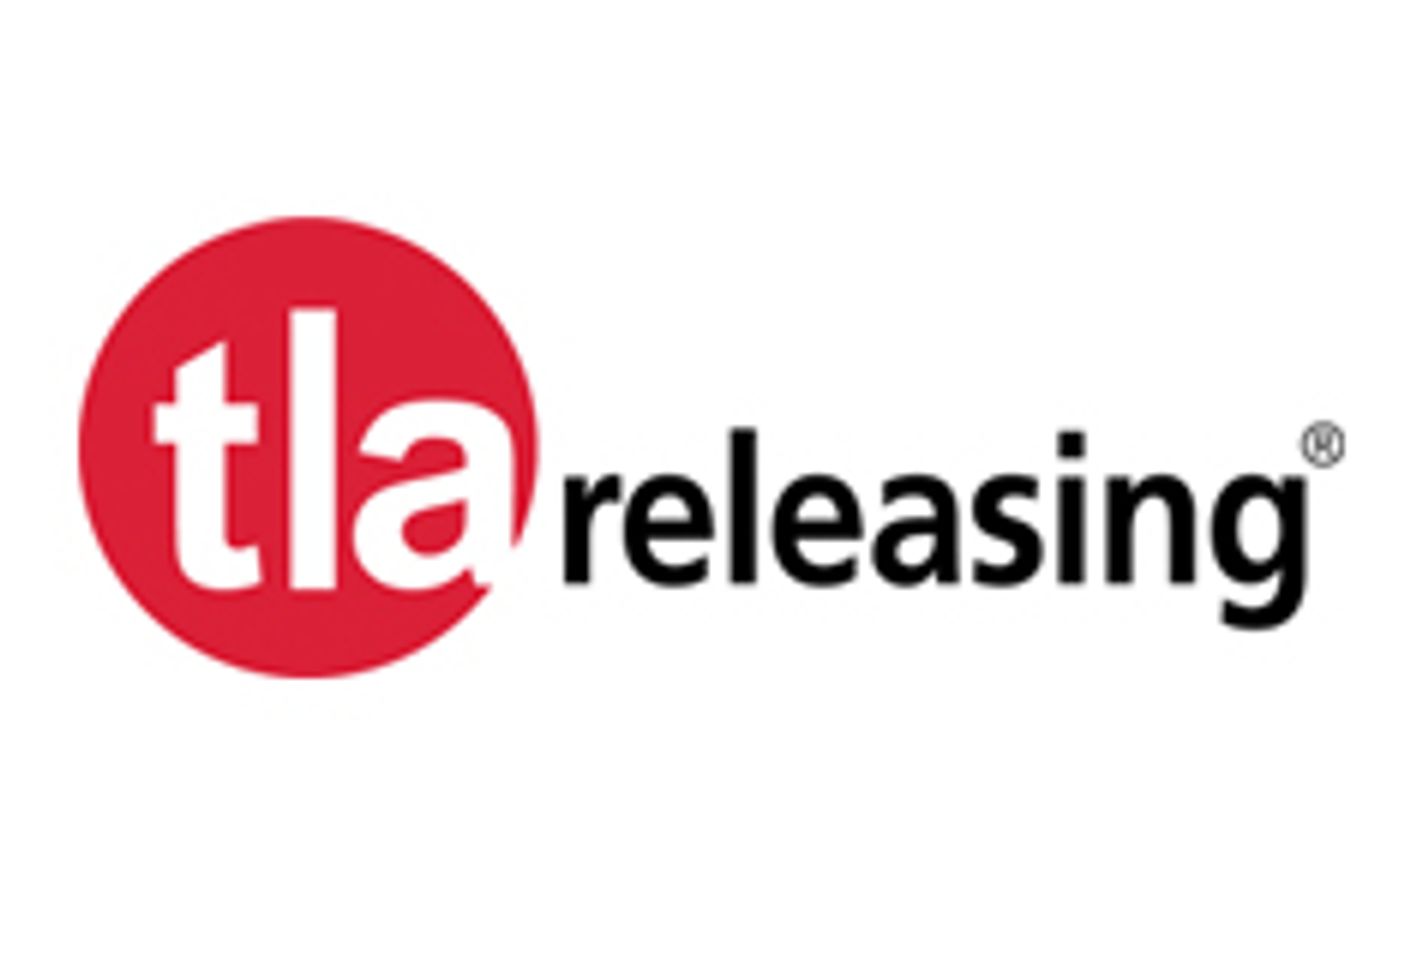 TLA Releasing Announces New Strategy